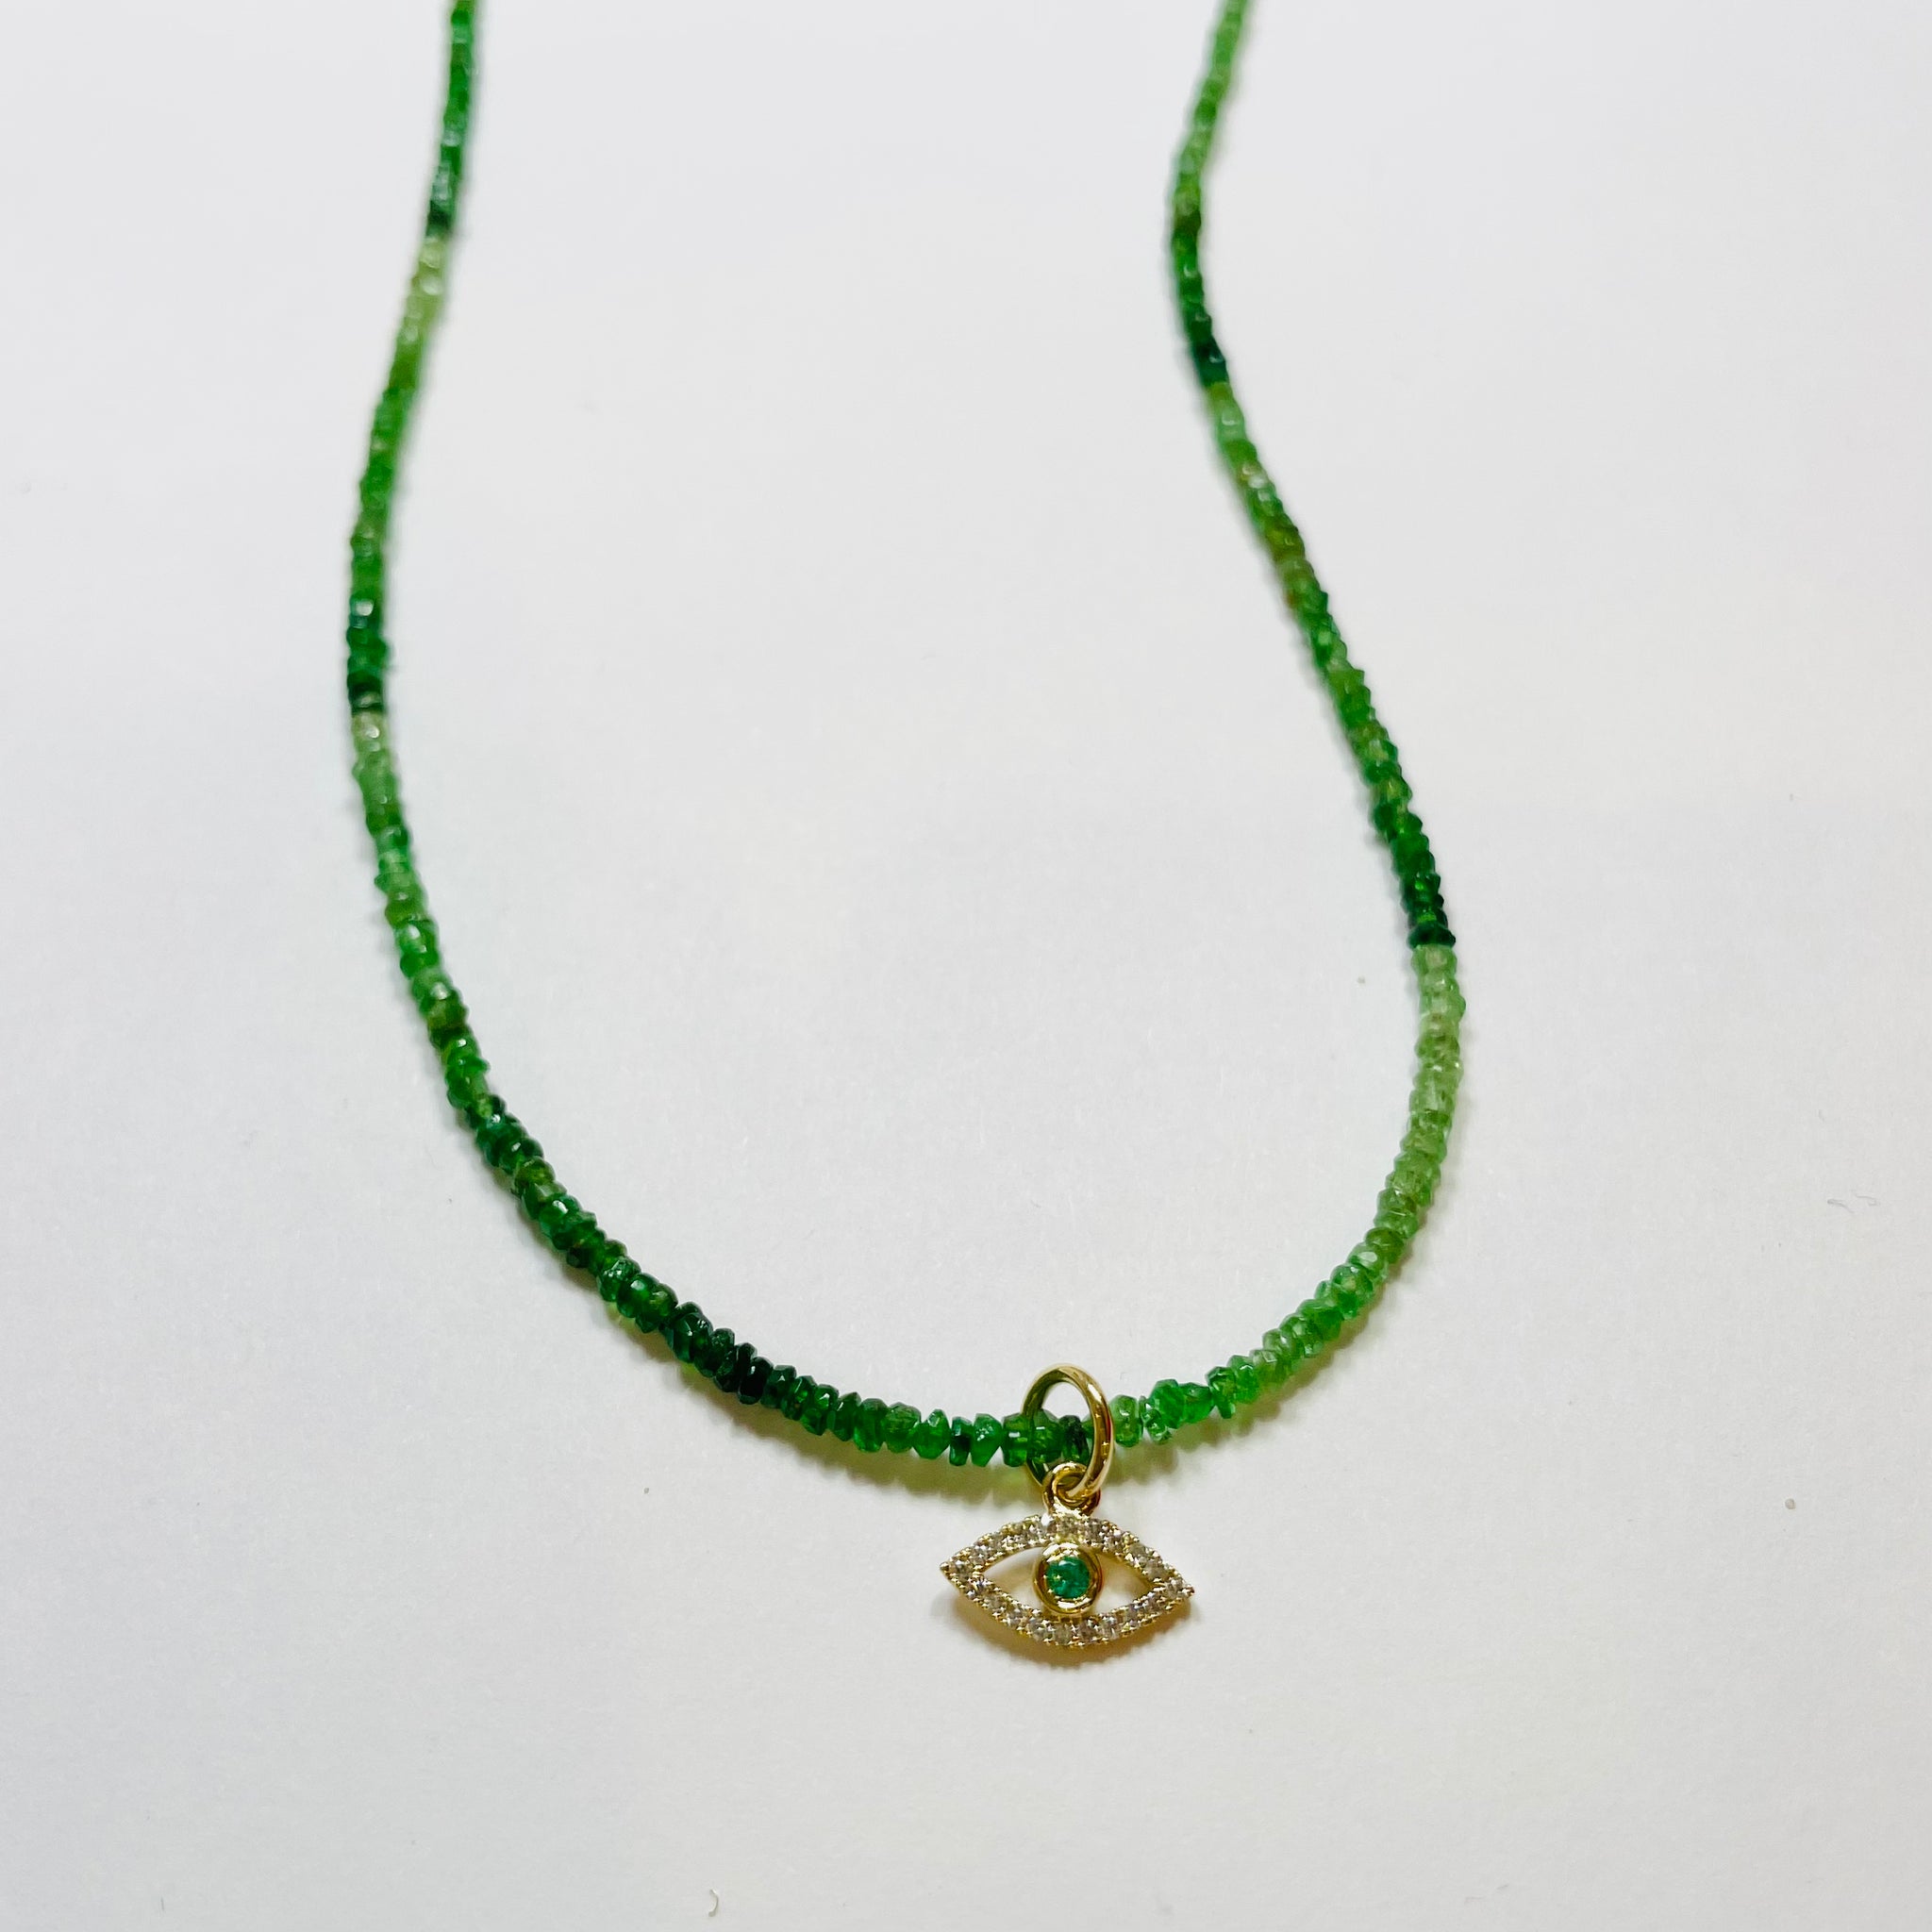 delicate emerald necklace with evil eye charm